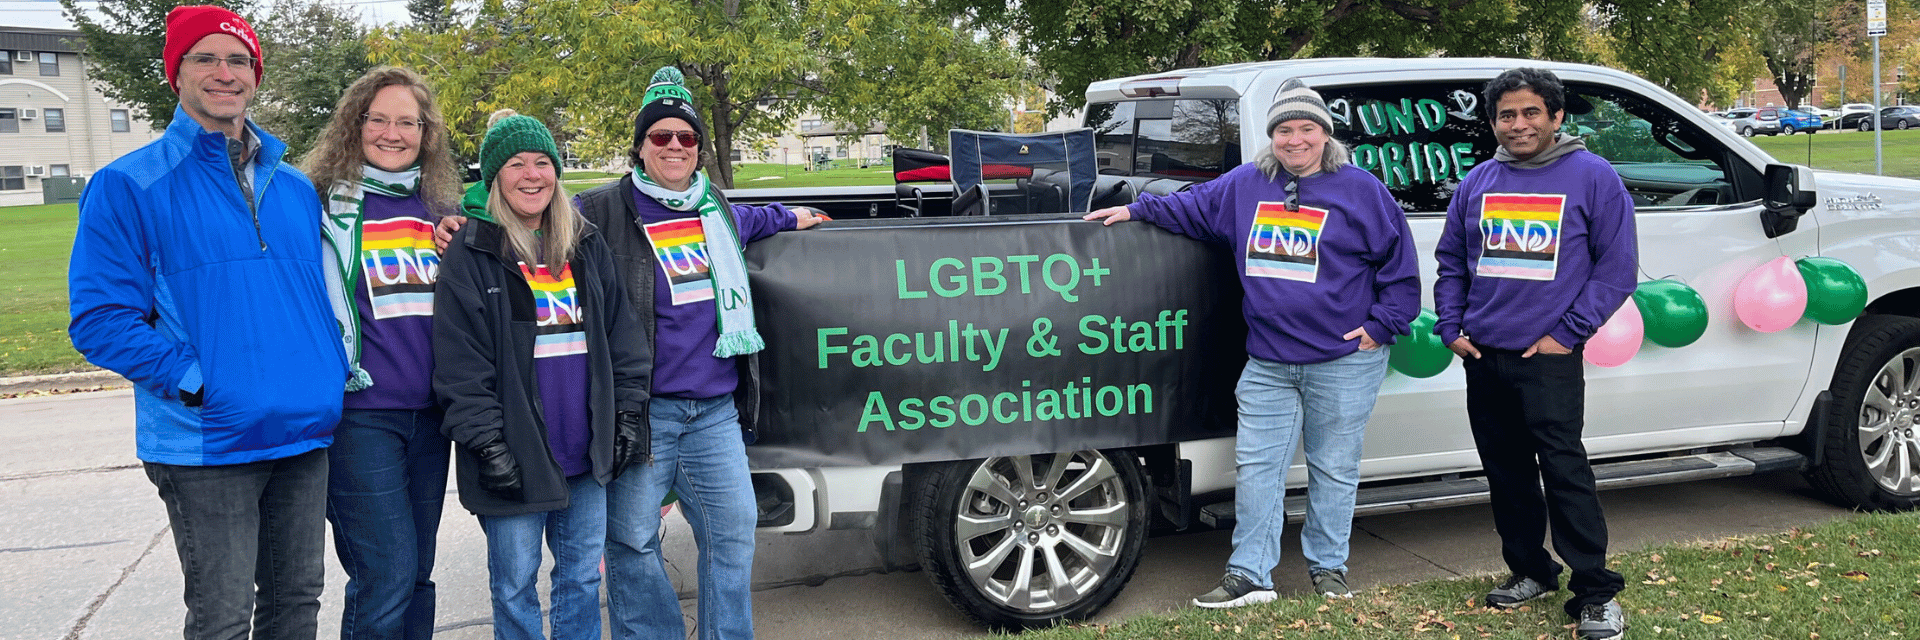 UND LGBTQ+ Faculty & Staff Association at Homecoming 2023